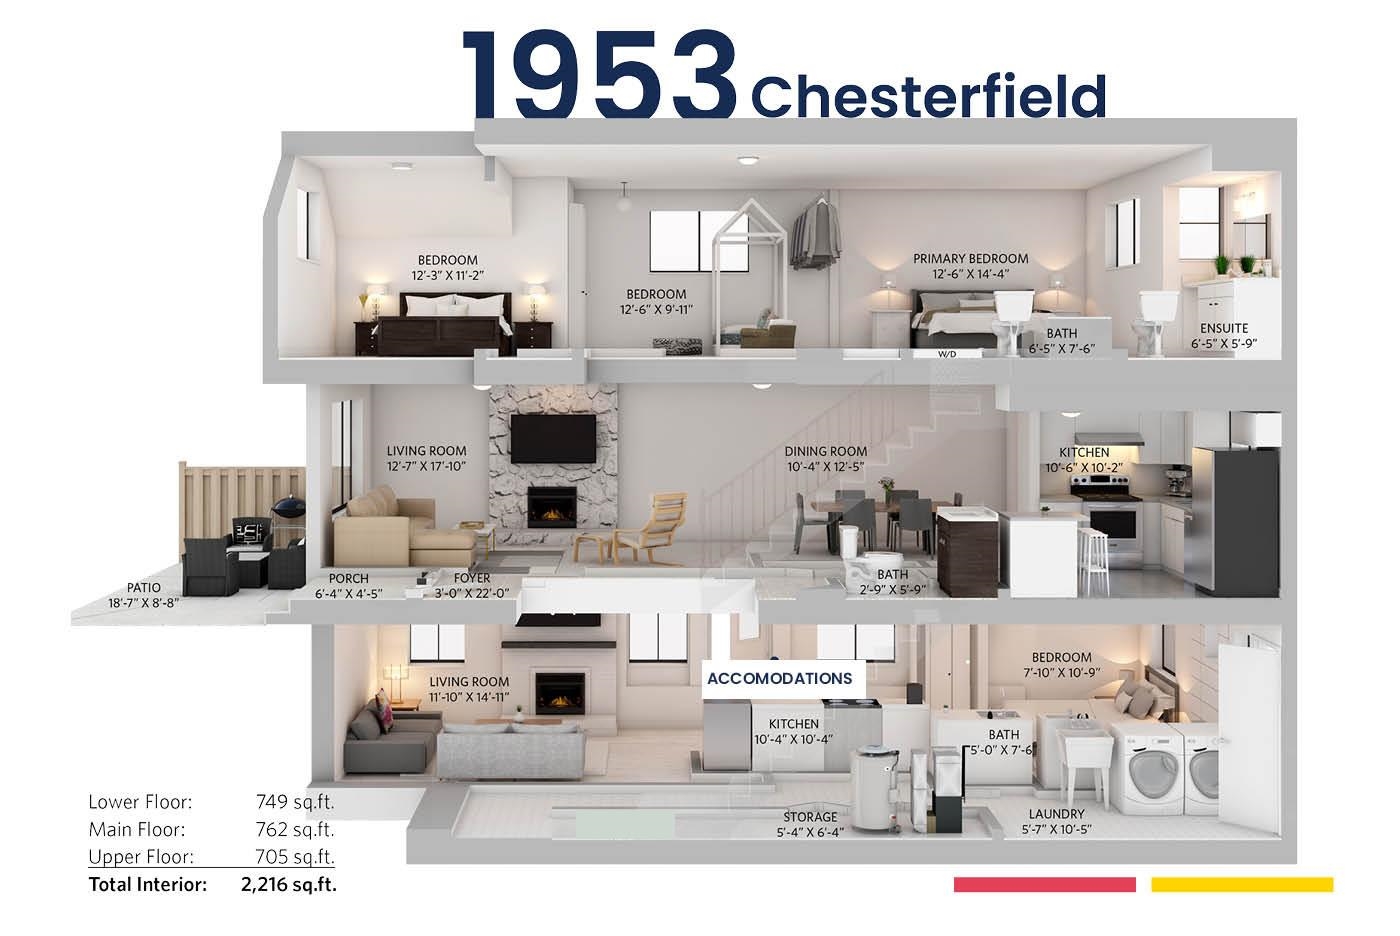 Listing image of 1953 CHESTERFIELD AVENUE